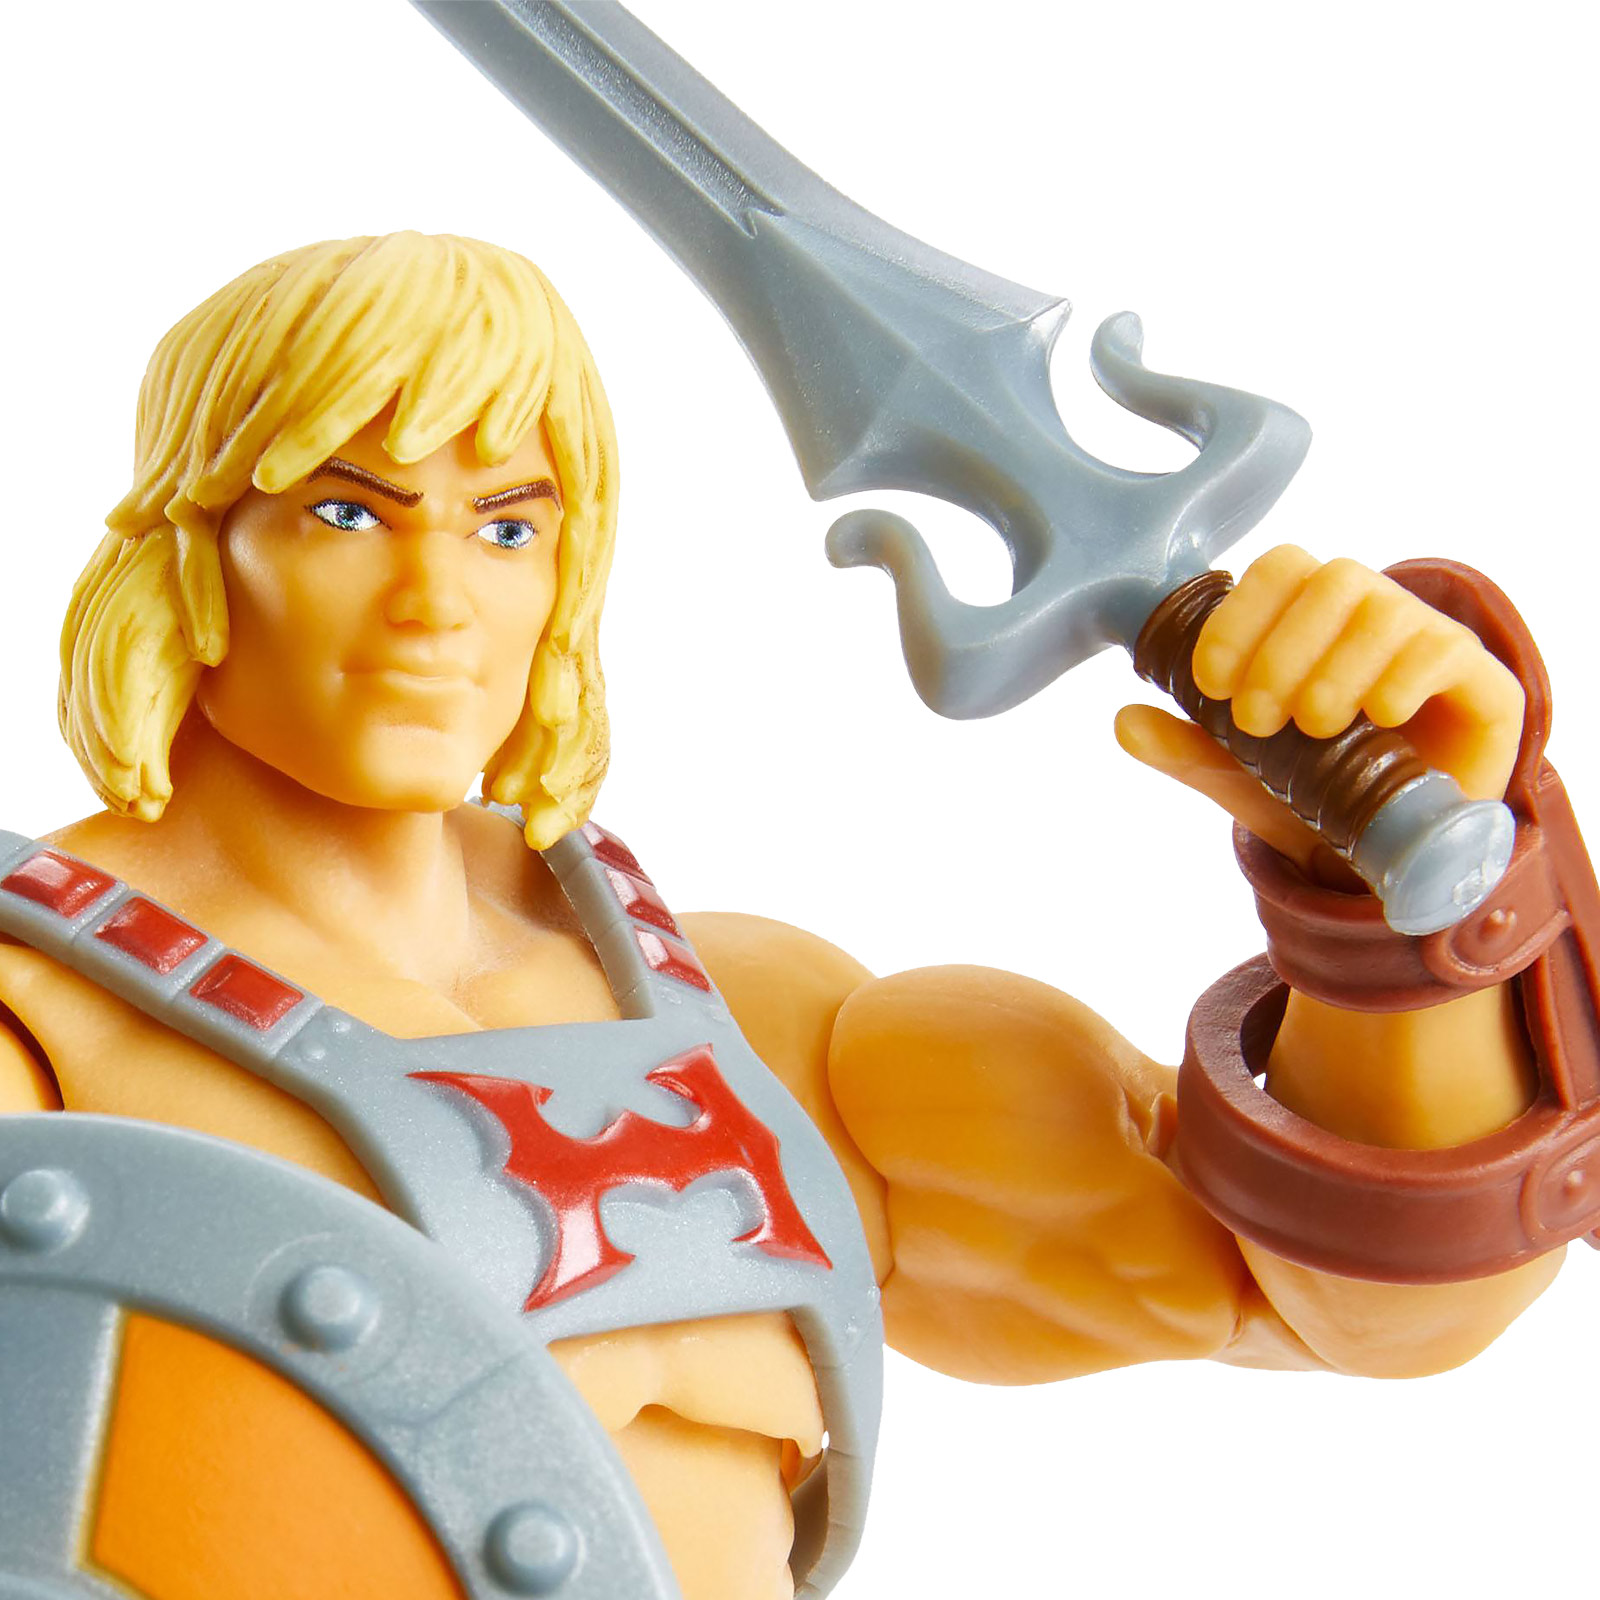 Masters of the Universe - He-Man Actionfigur